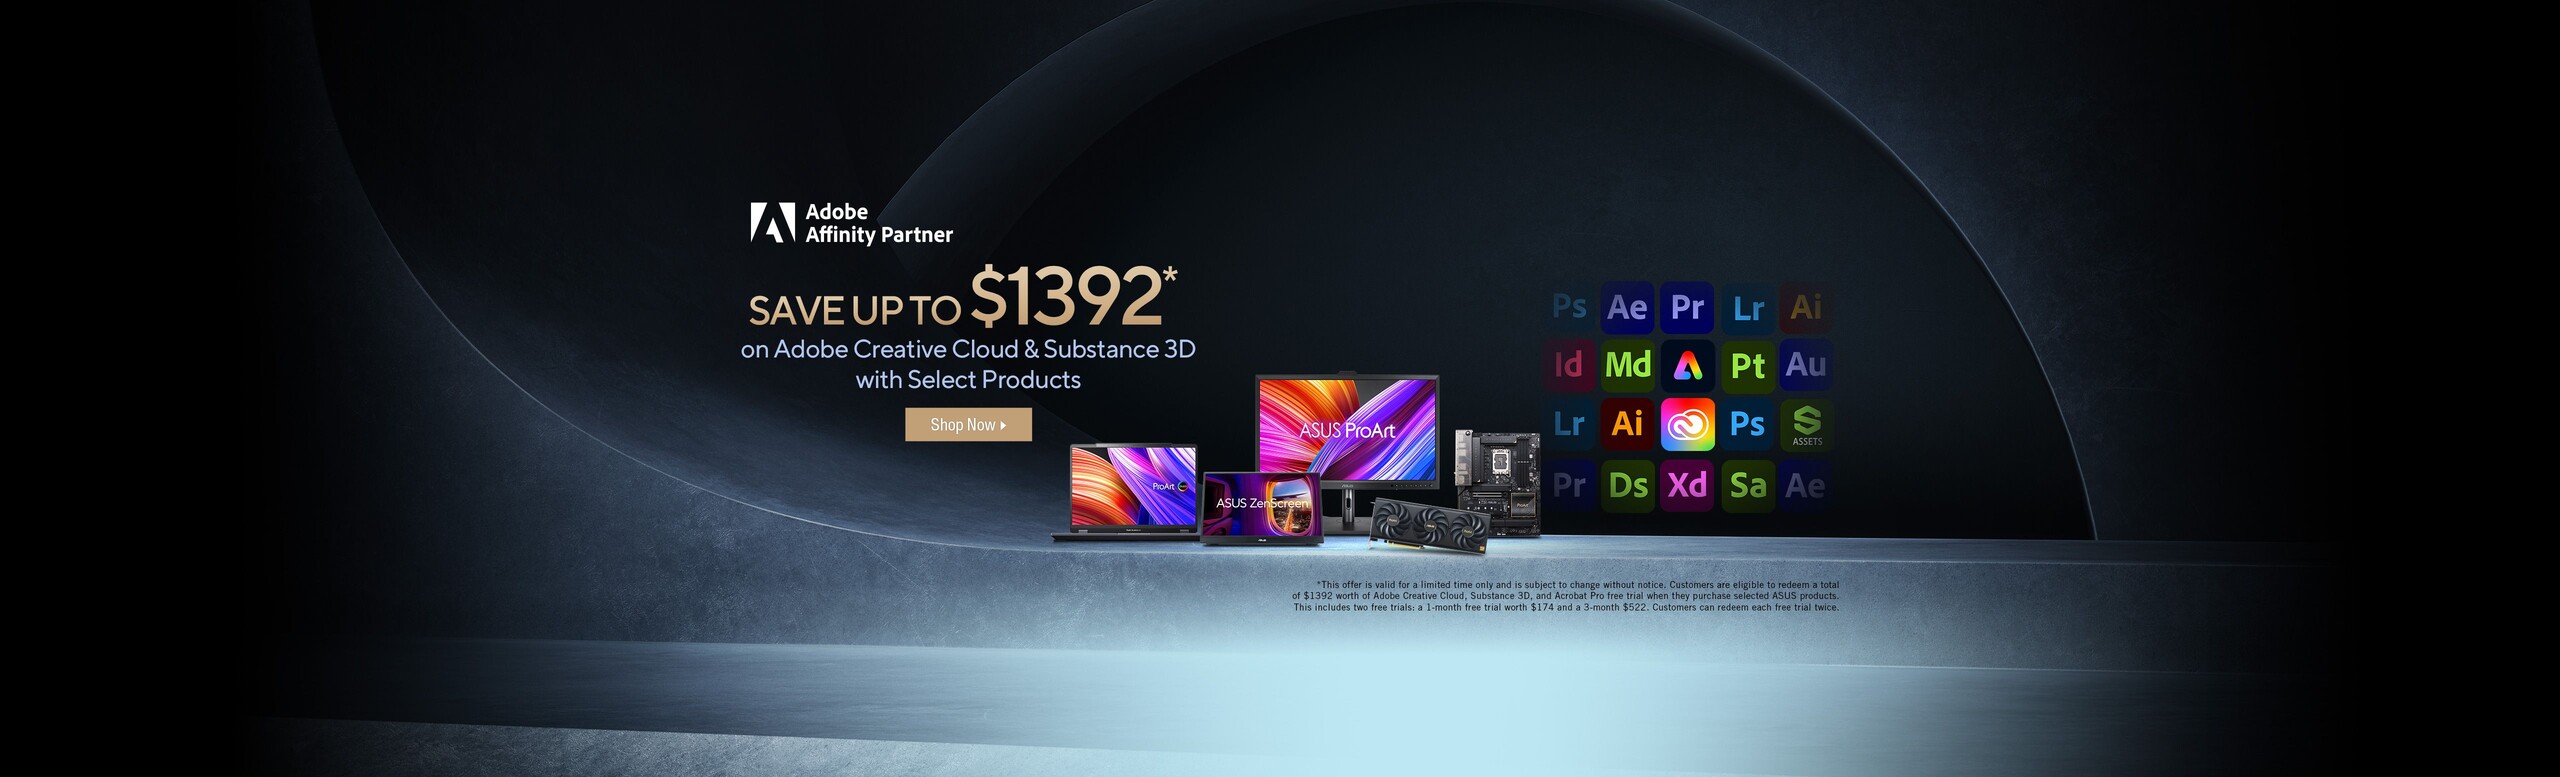 Save Up to $1392 * on Adobe Creative Cloud & Substance 3D with Select Products  *This offer is valid for a limited time only and is subject to change without notice.